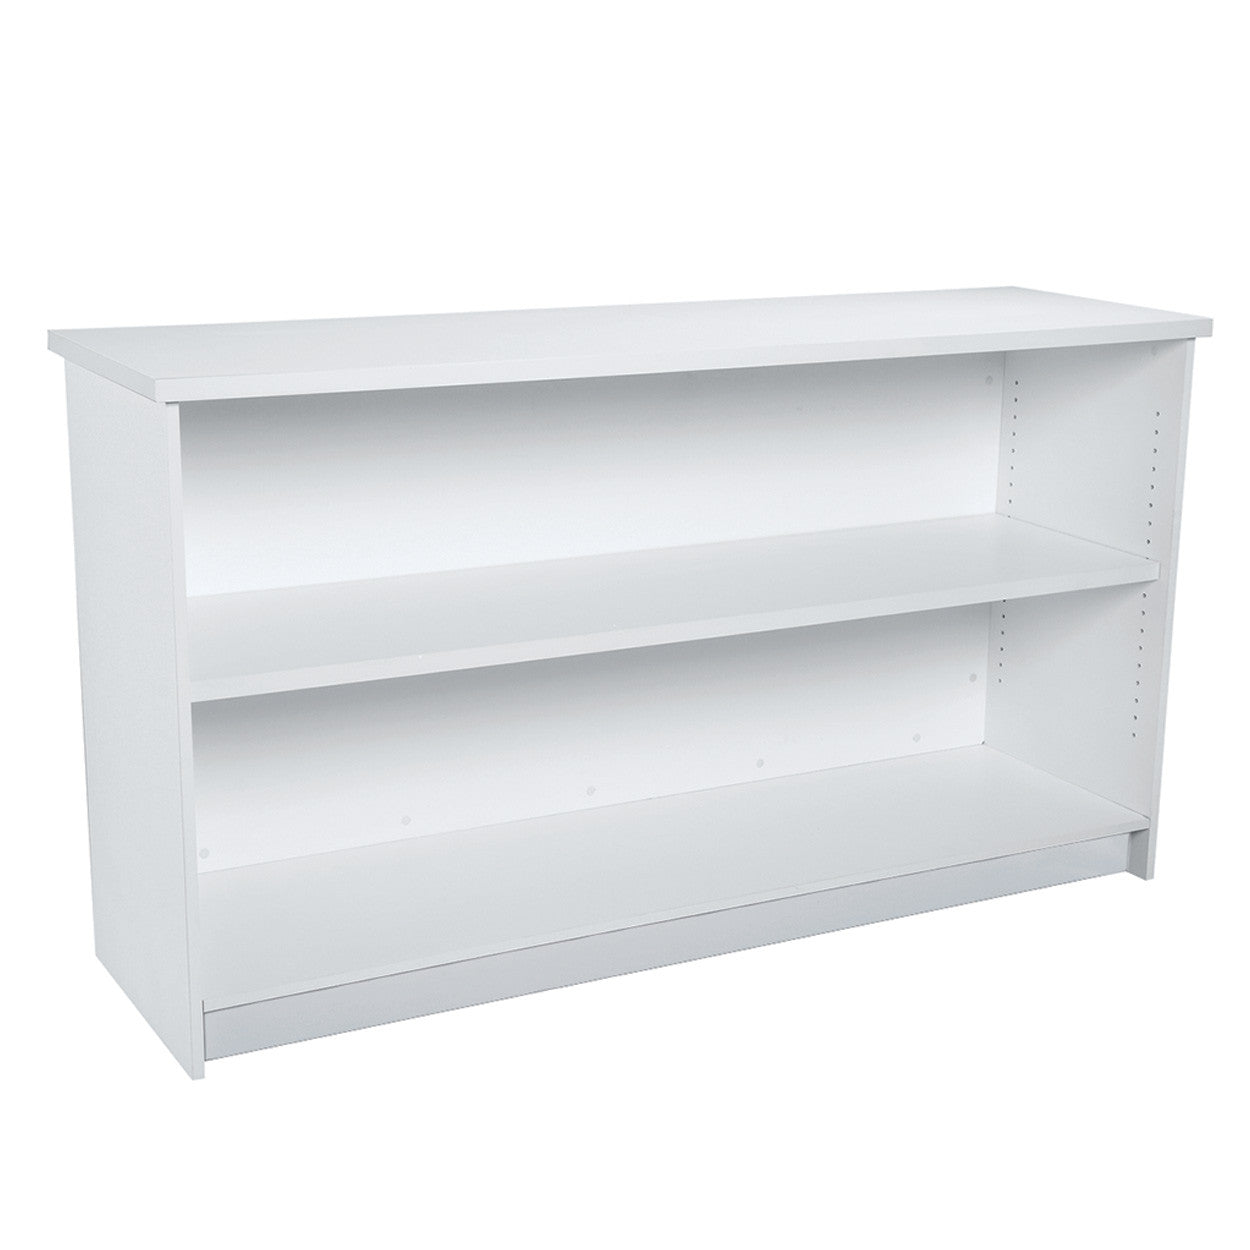 Counter with Adjustable Shelf - W1800 x D544 x H1000